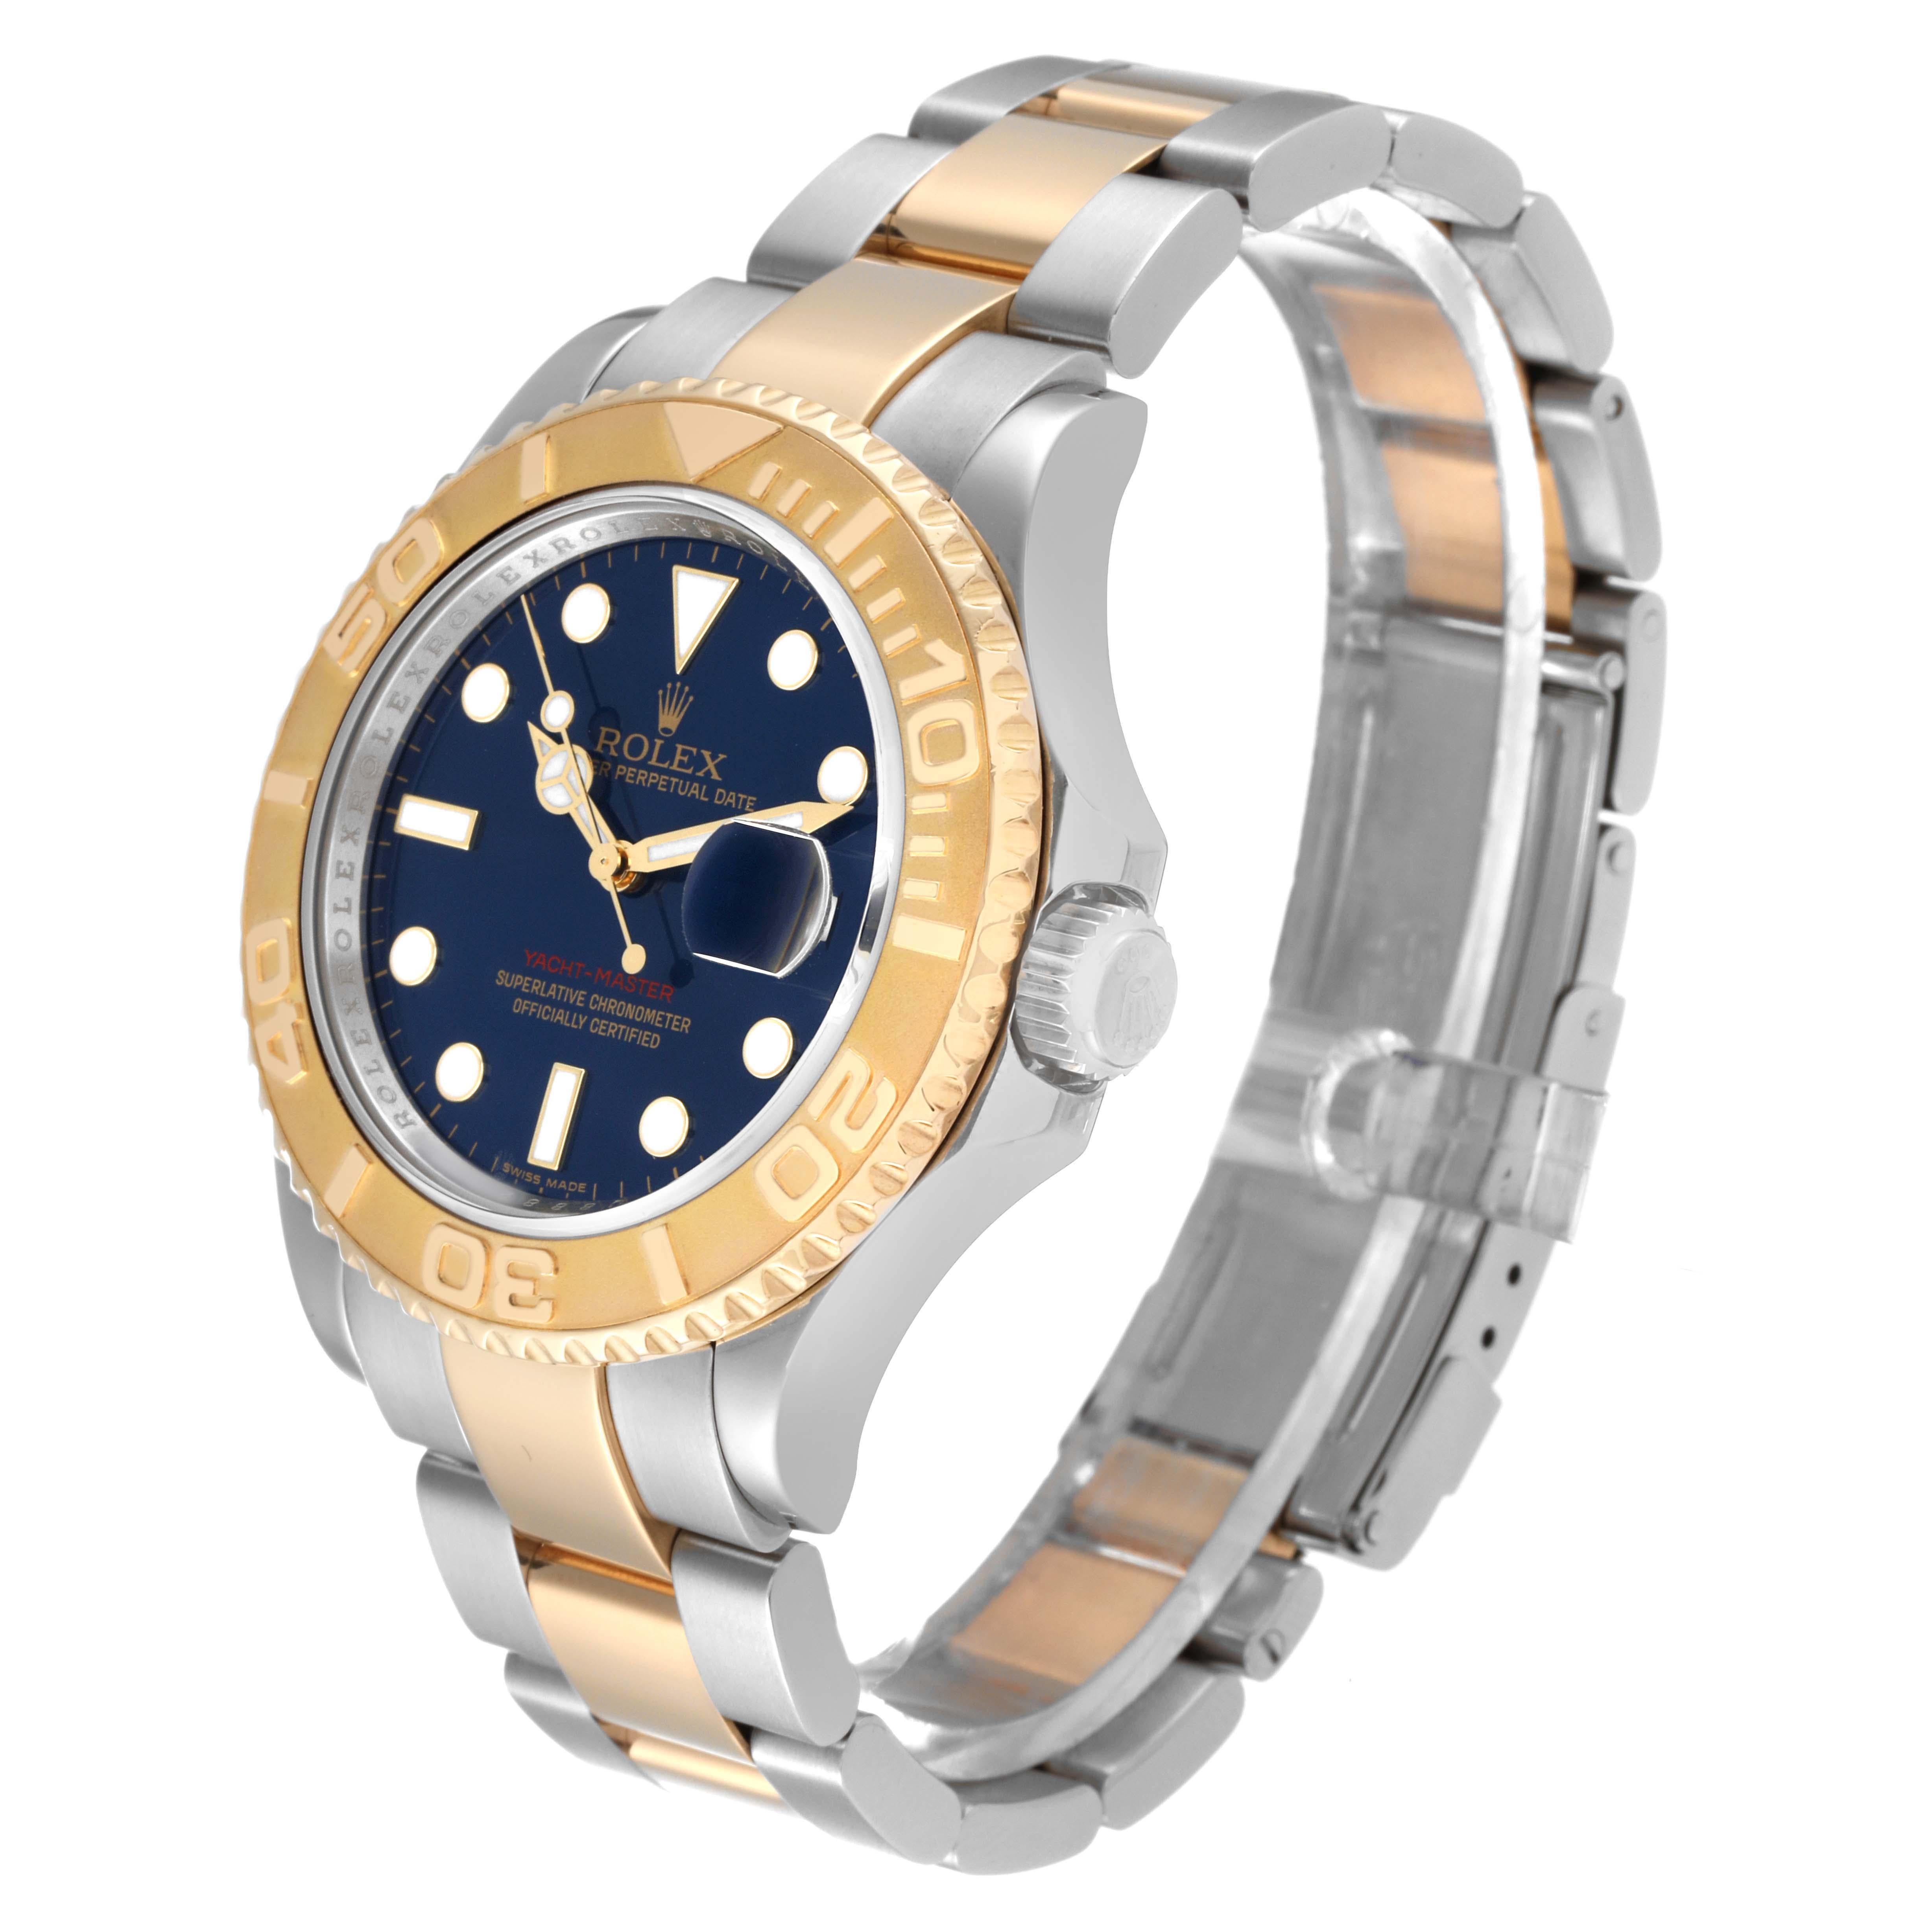 yacht master blue and gold